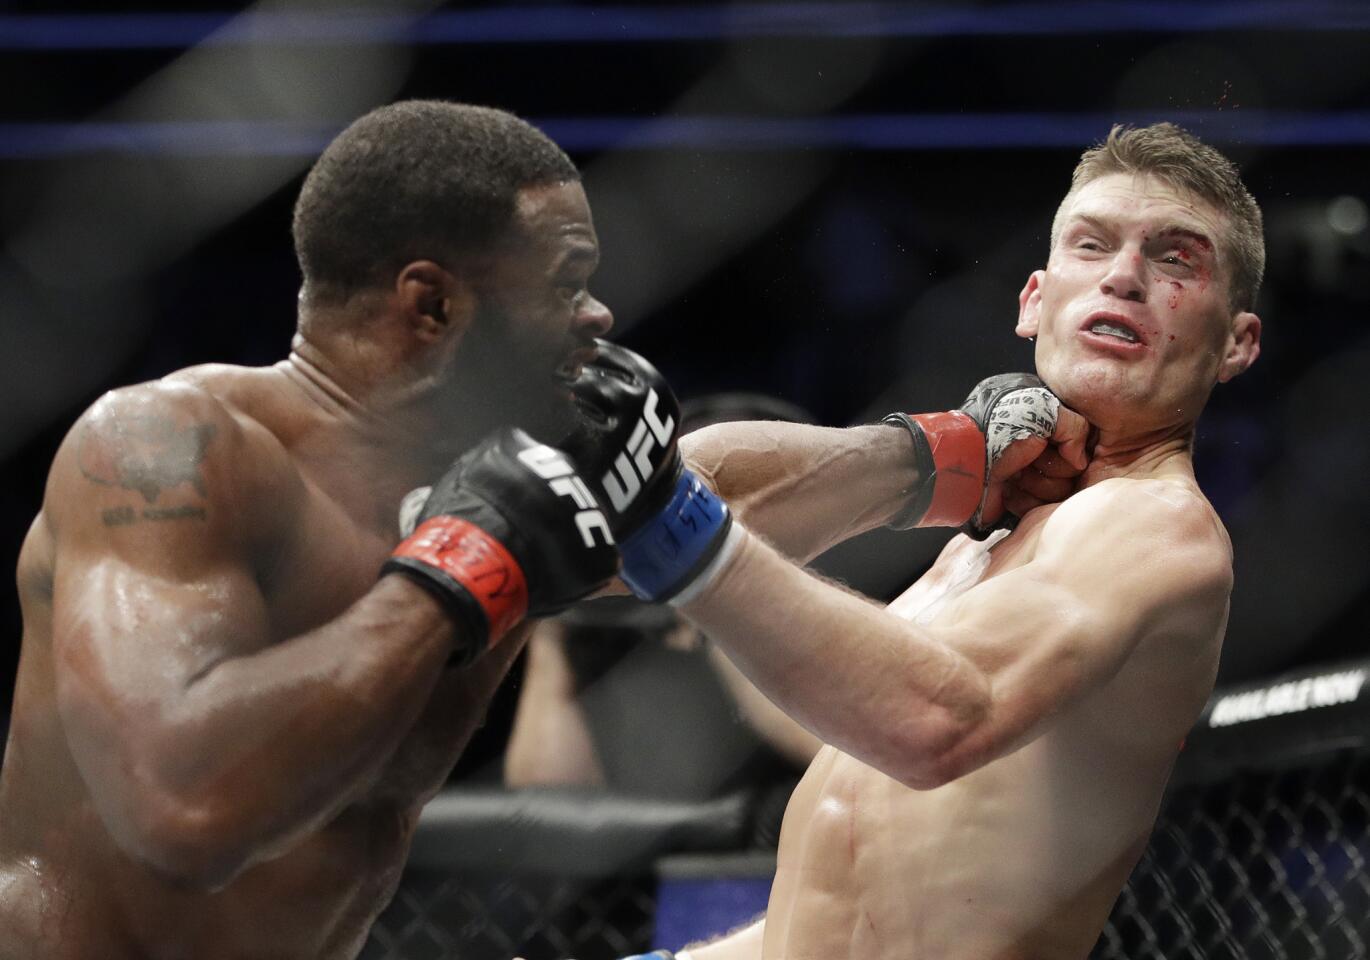 Tyron Woodley, left, hits Stephen Thompson in a welterweight championship mixed martial arts bout at UFC 209, Saturday, March 4, 2017, in Las Vegas. (AP Photo/John Locher)